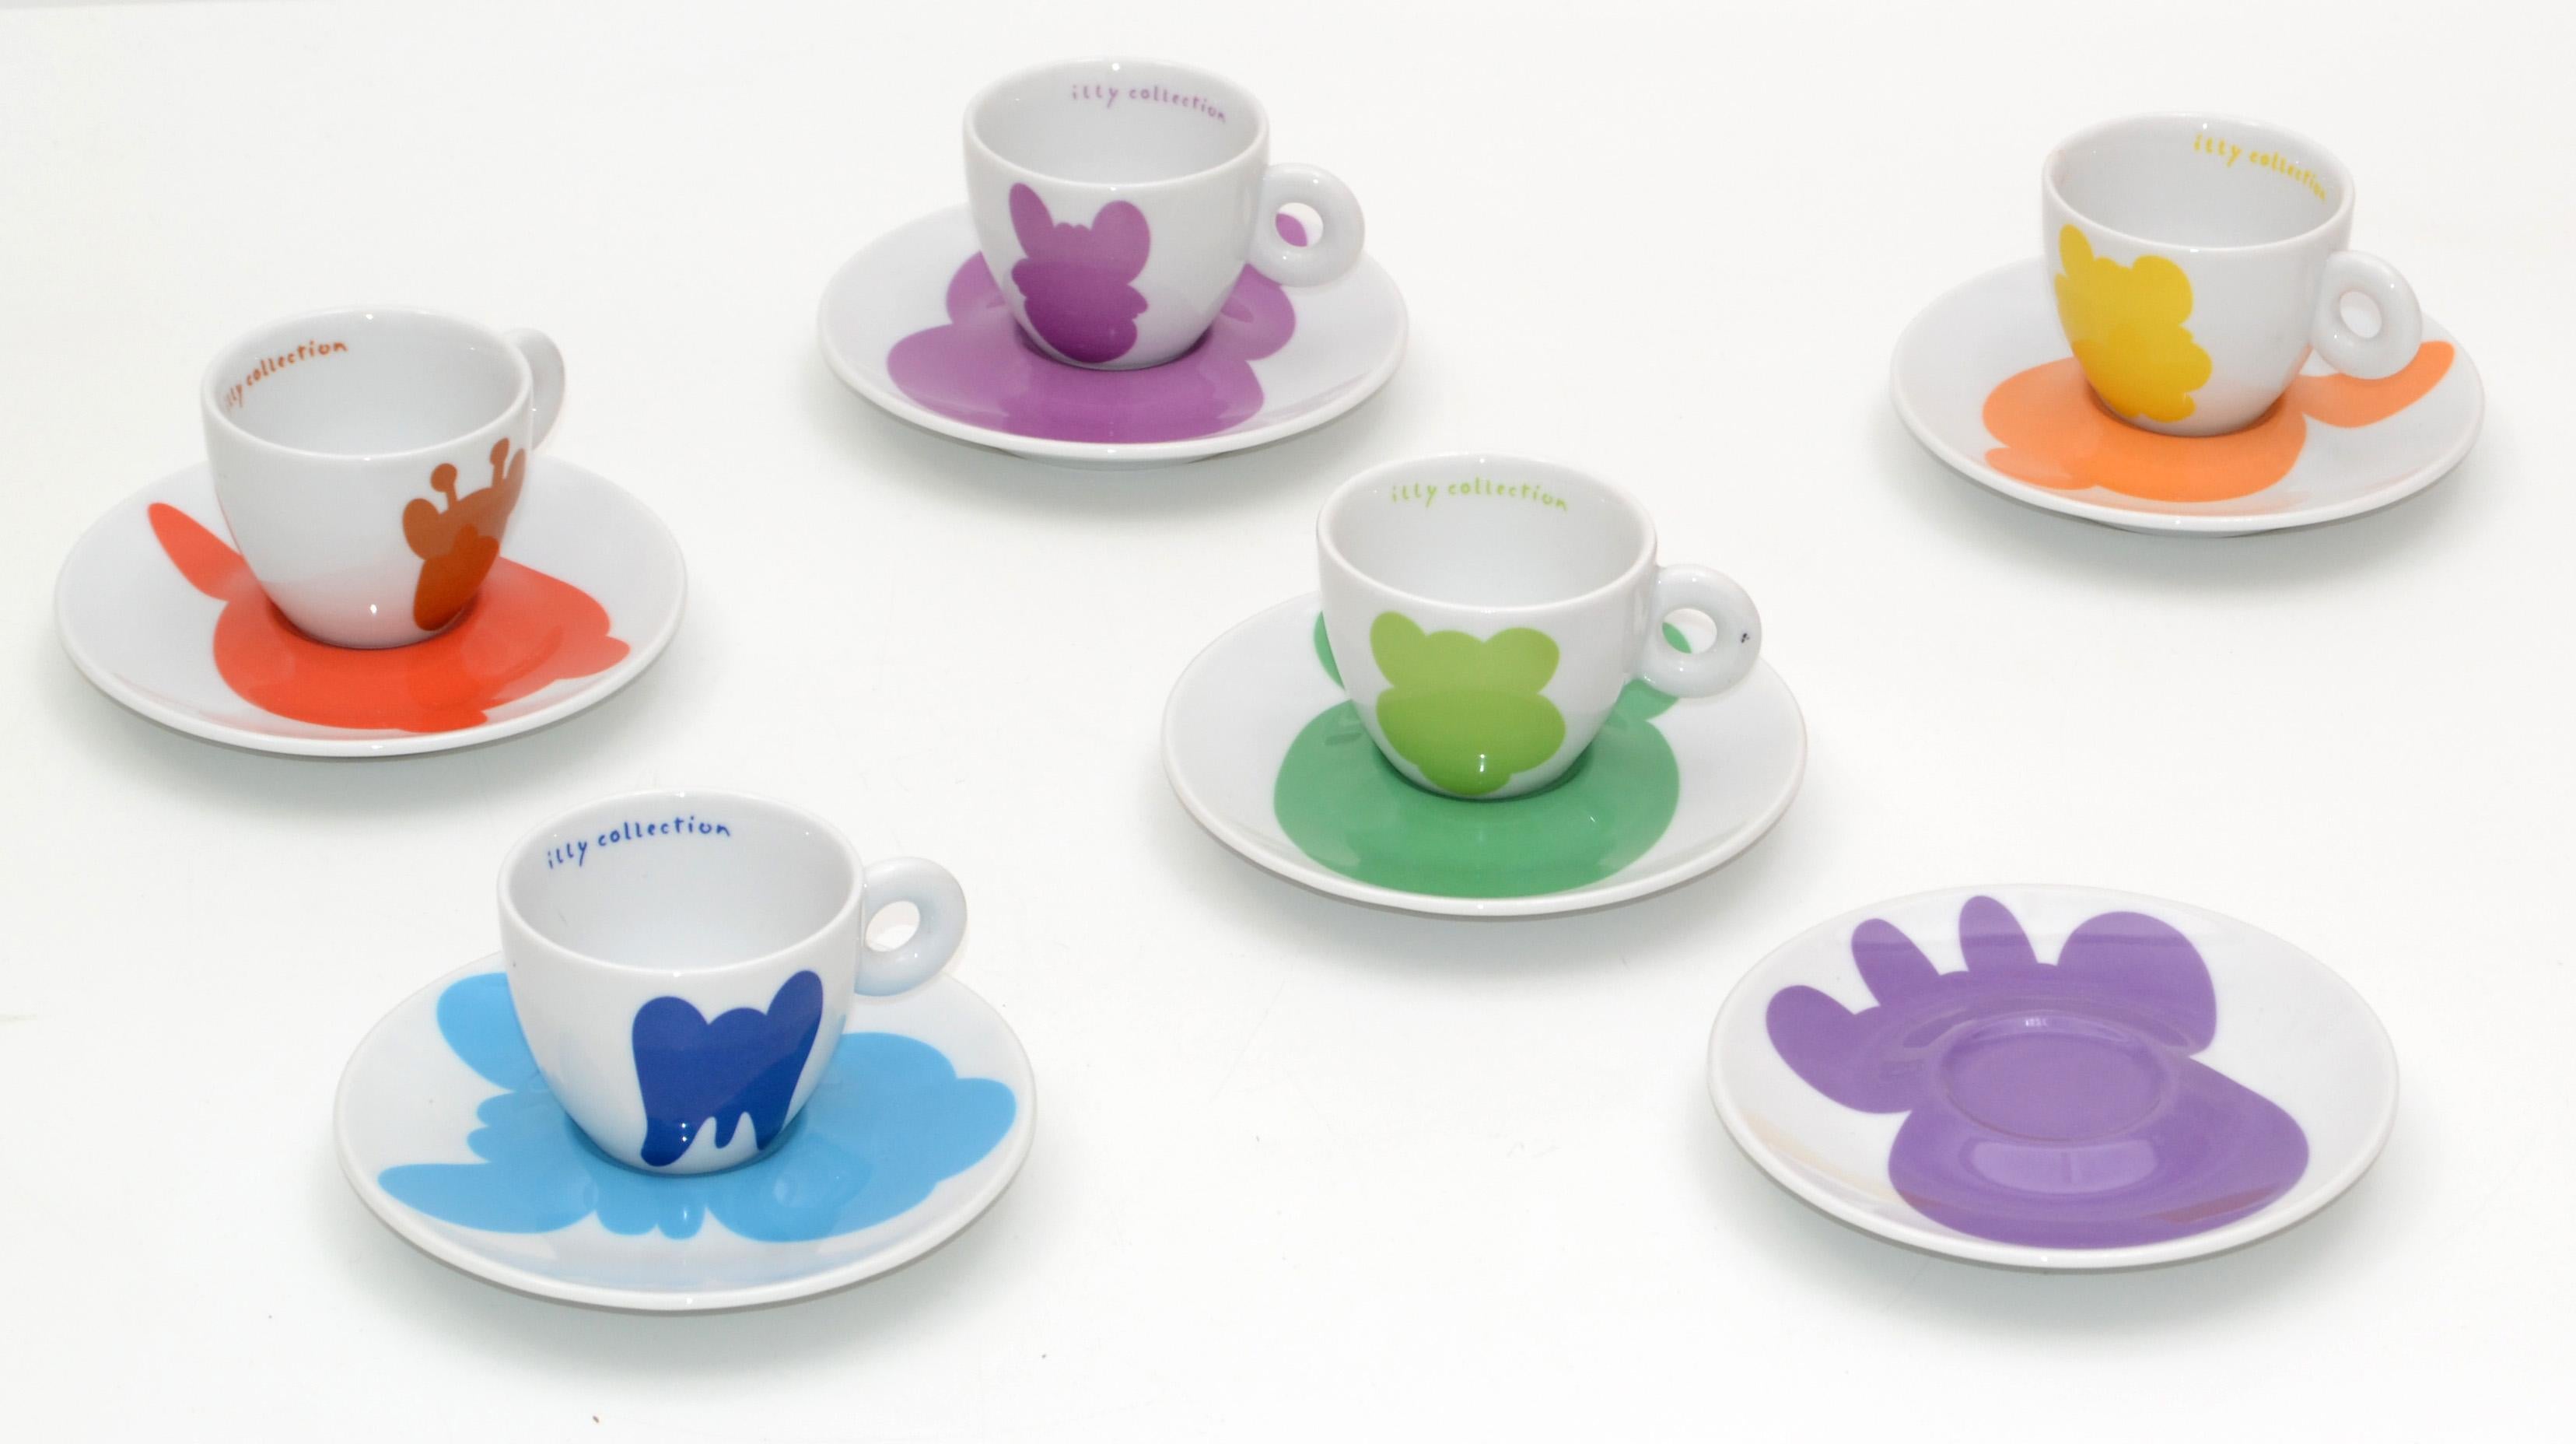 Jeff Koons Illy Collection Pop Art Espresso Set of 5 Porcelain by Rosenthal 2001 For Sale 5